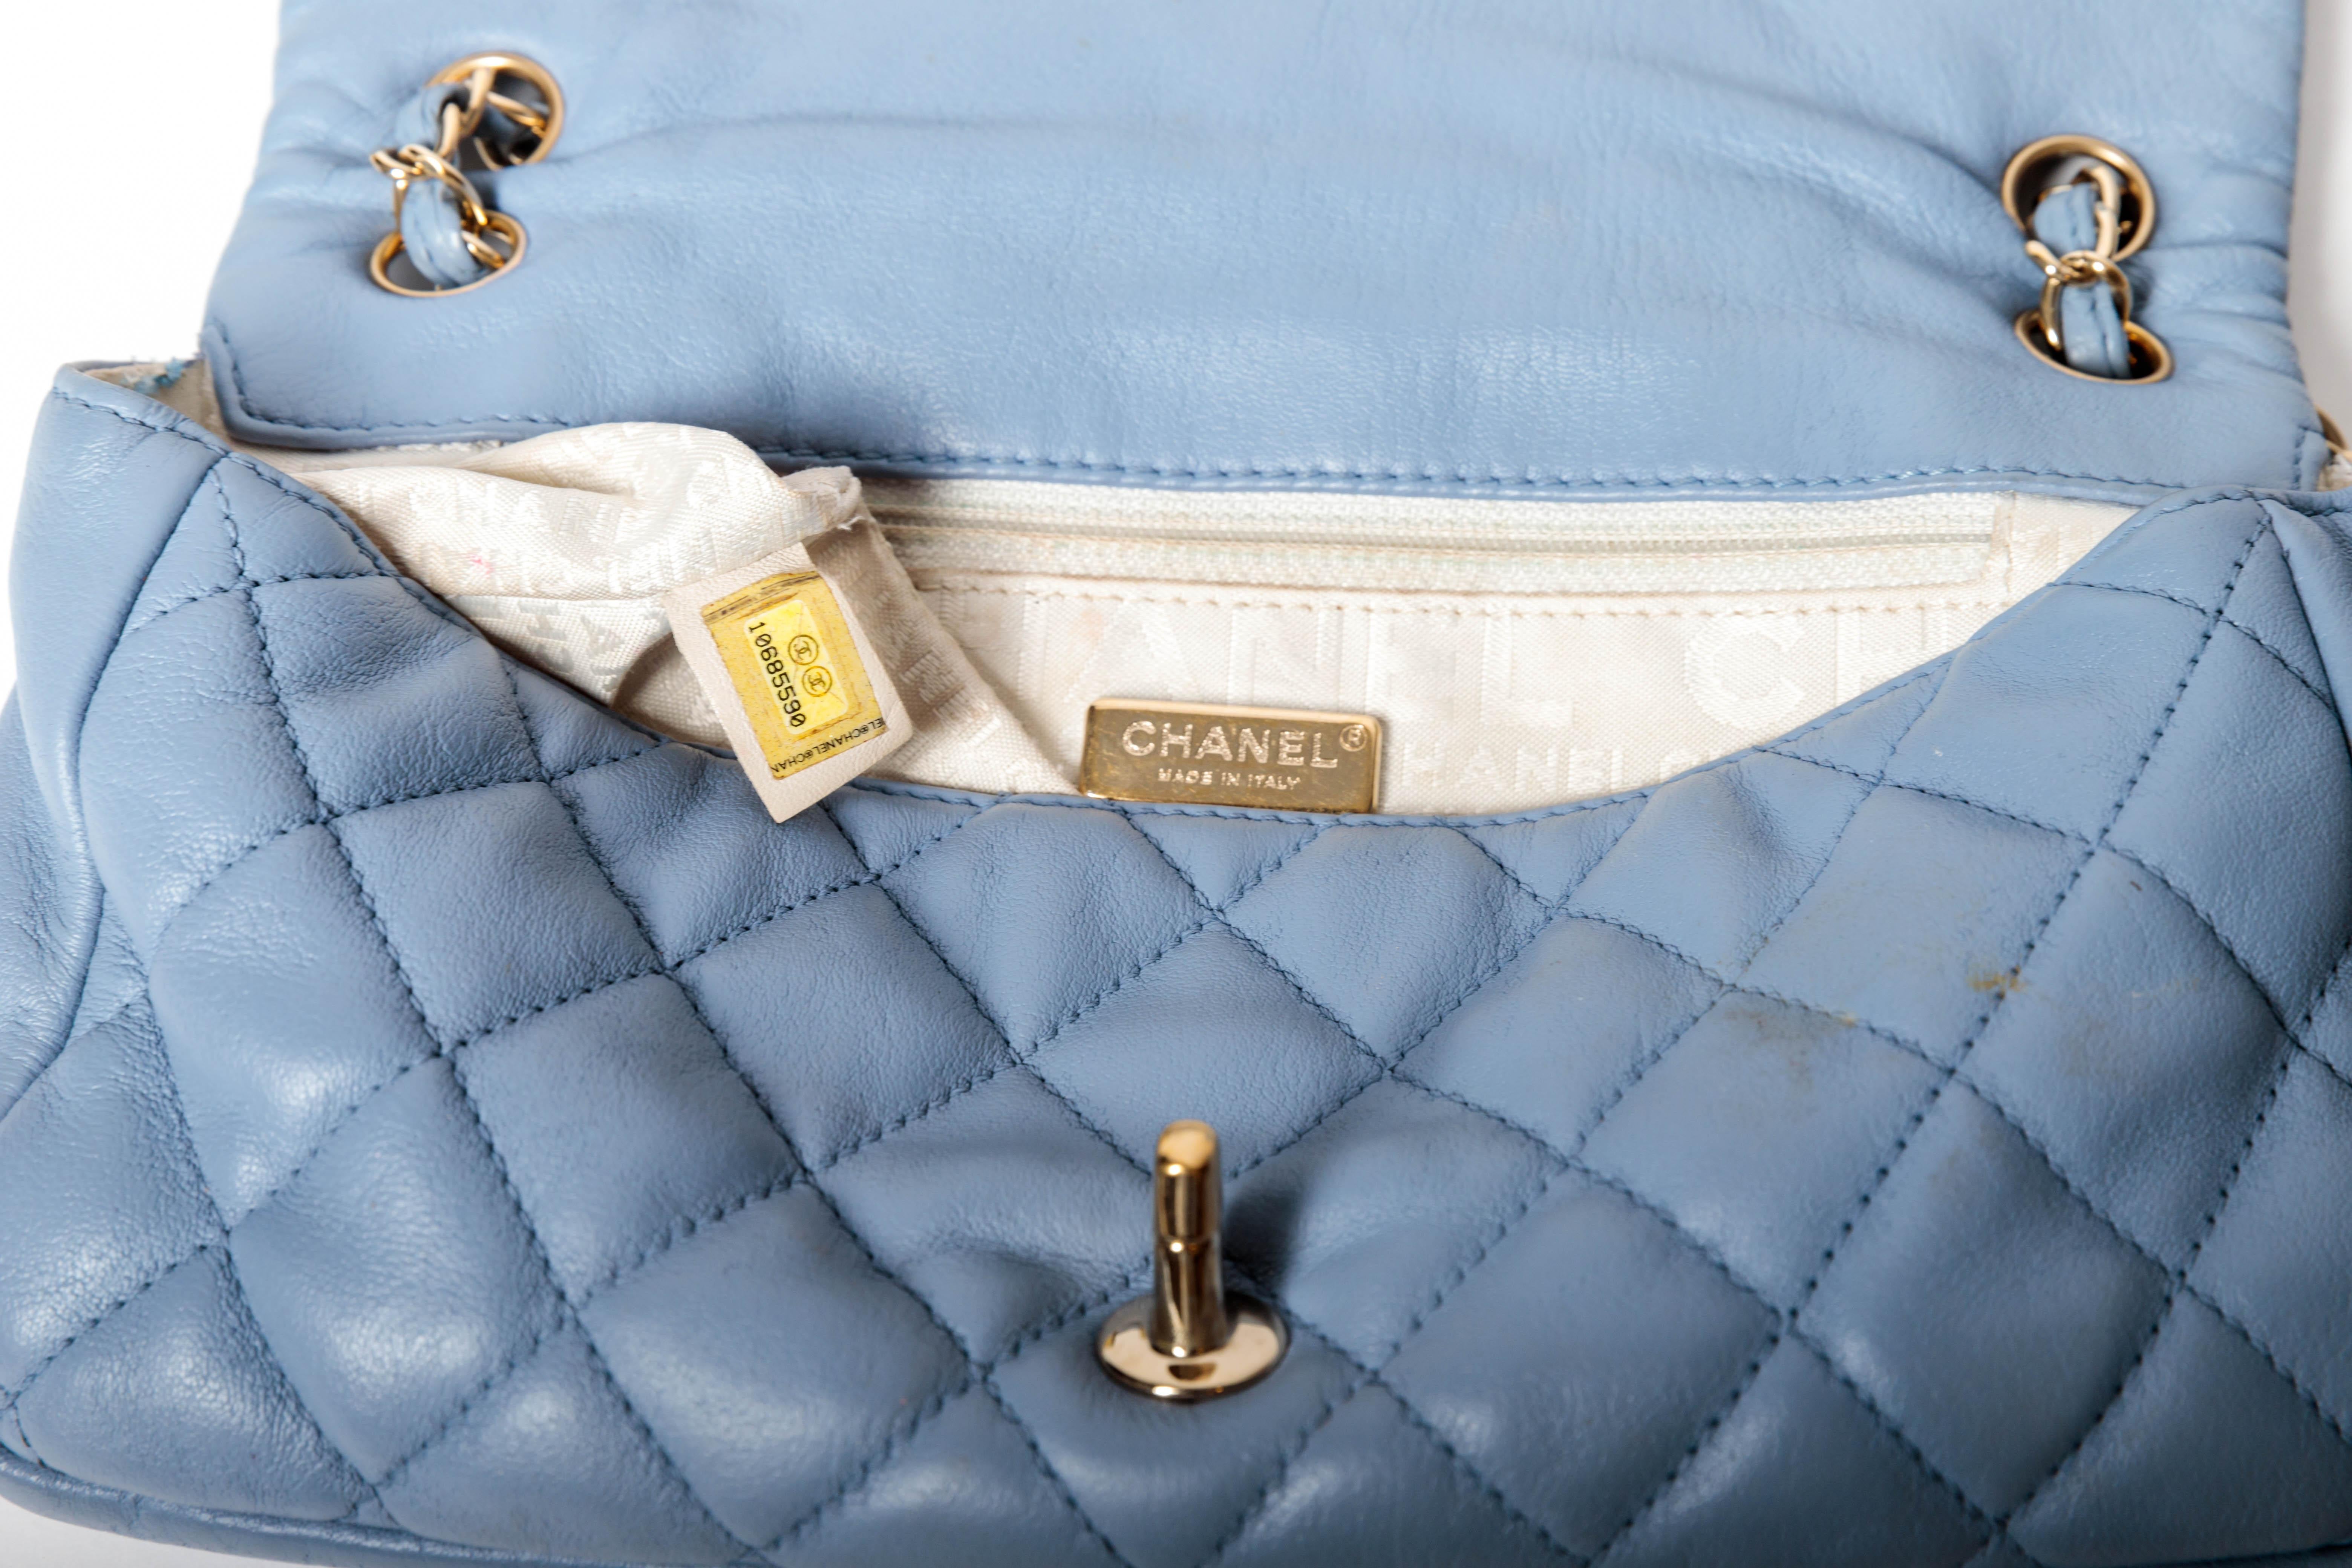 Chanel Powder Blue Single Flap with Gold Hardware - 2005 - 2006 Collection For Sale 5